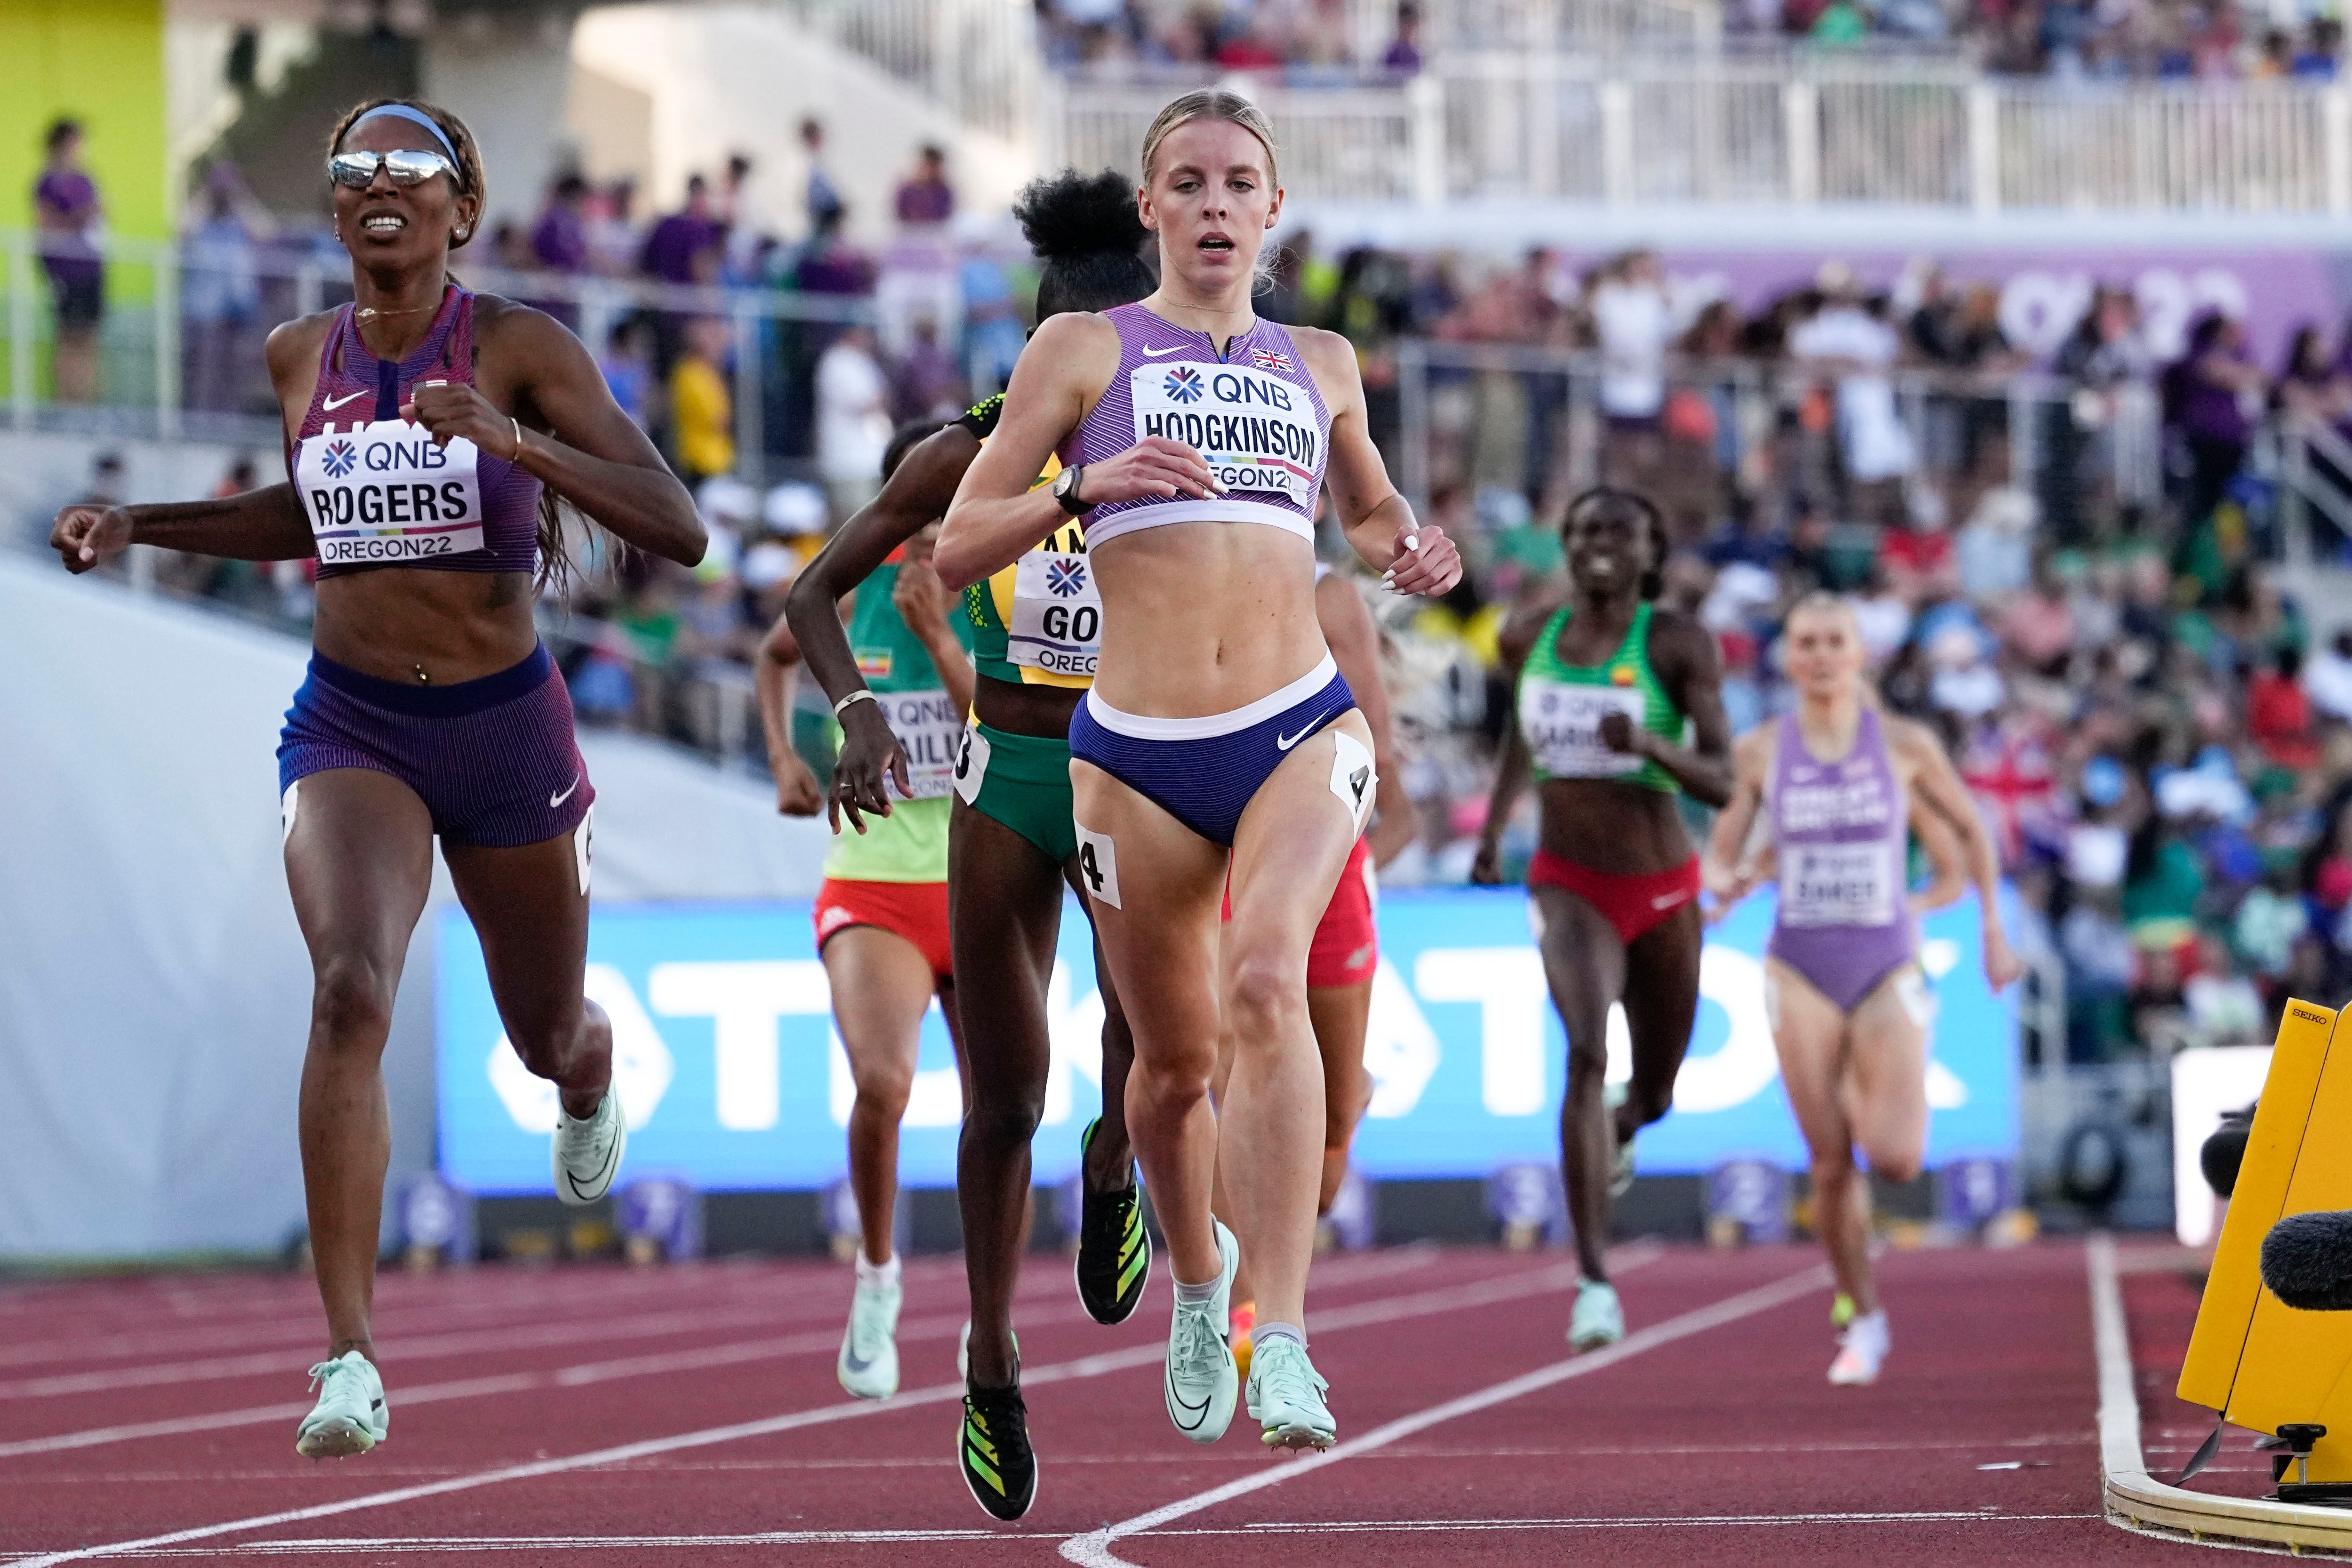 Keely Hodgkinson is in Sunday’s 800m final at the World Championships. (Ashley Landis/AP)